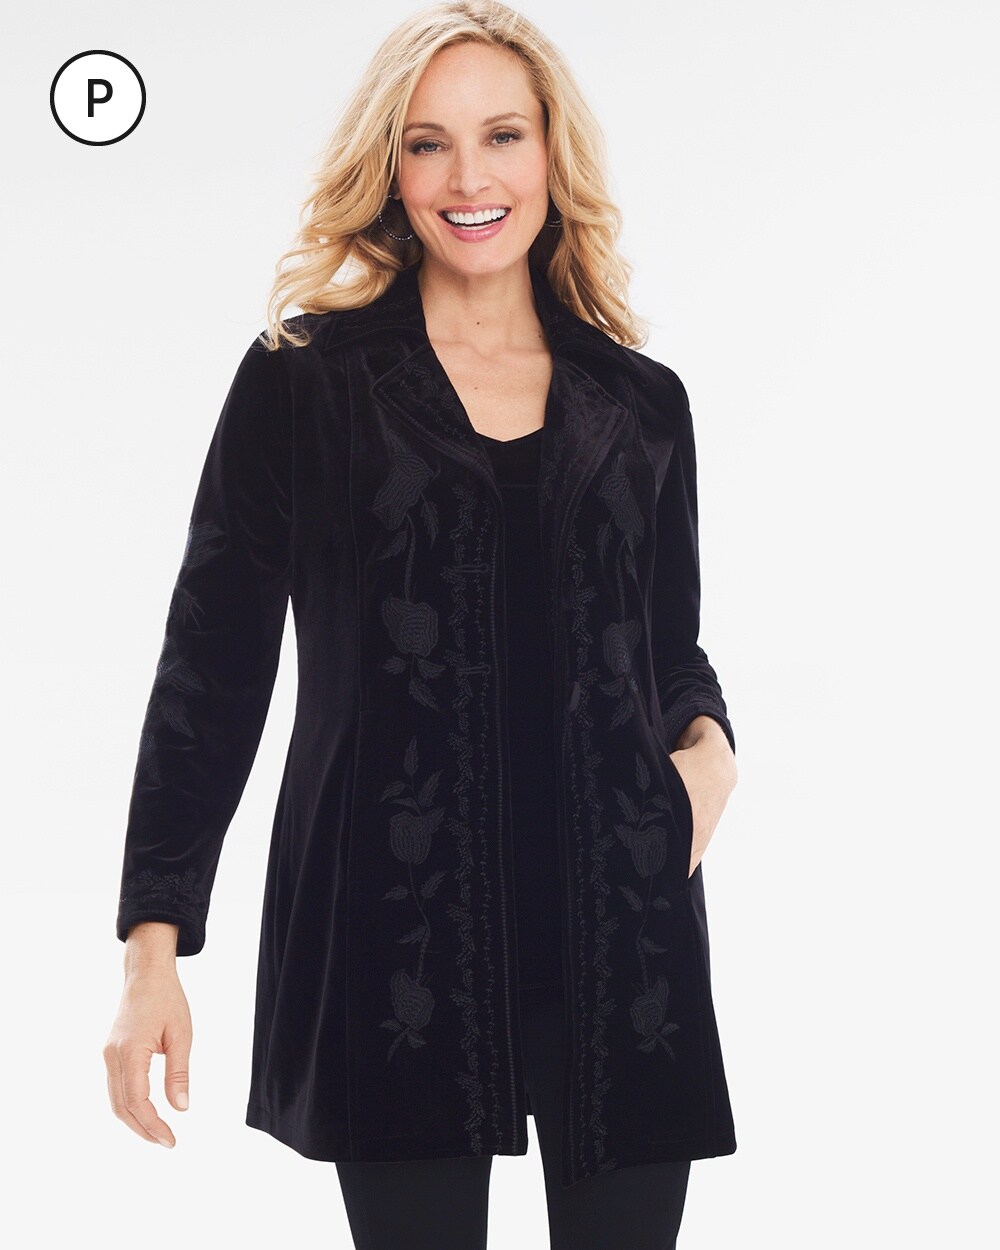 Travelers Collection Petite Velvet Embroidered Jacket